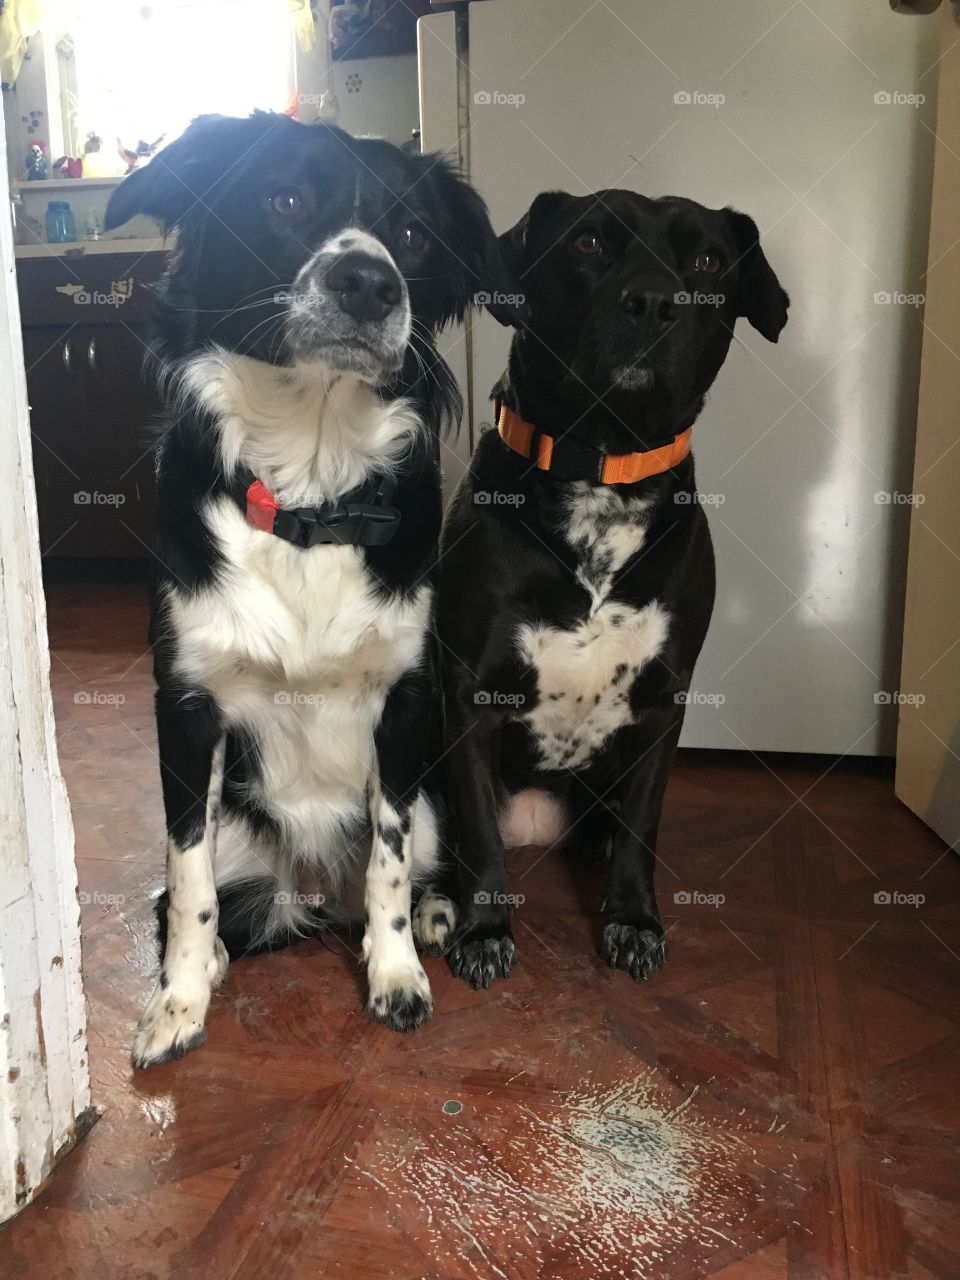 Two dogs sitting next to eachother inside